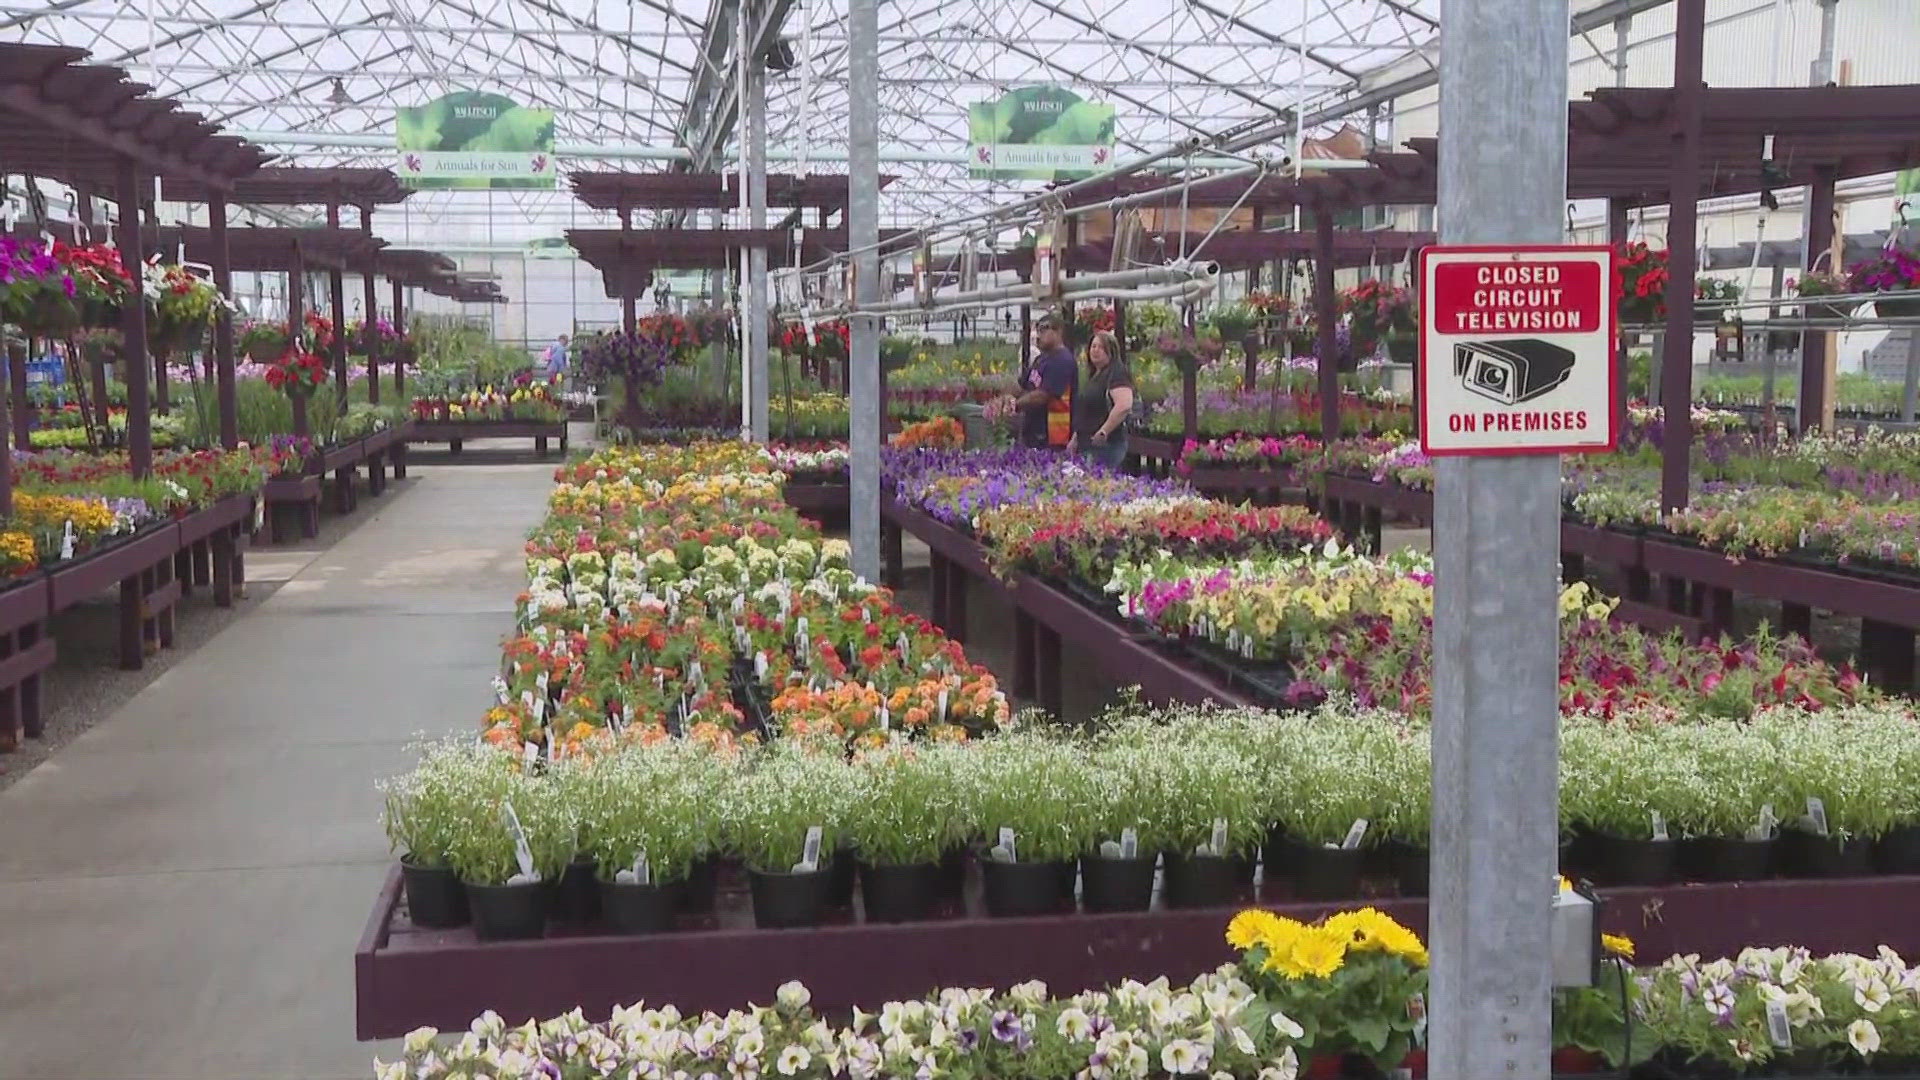 With planting season coming soon, Wallitsch Garden Center is helping the community get ready to bring in new flowers for their garden!